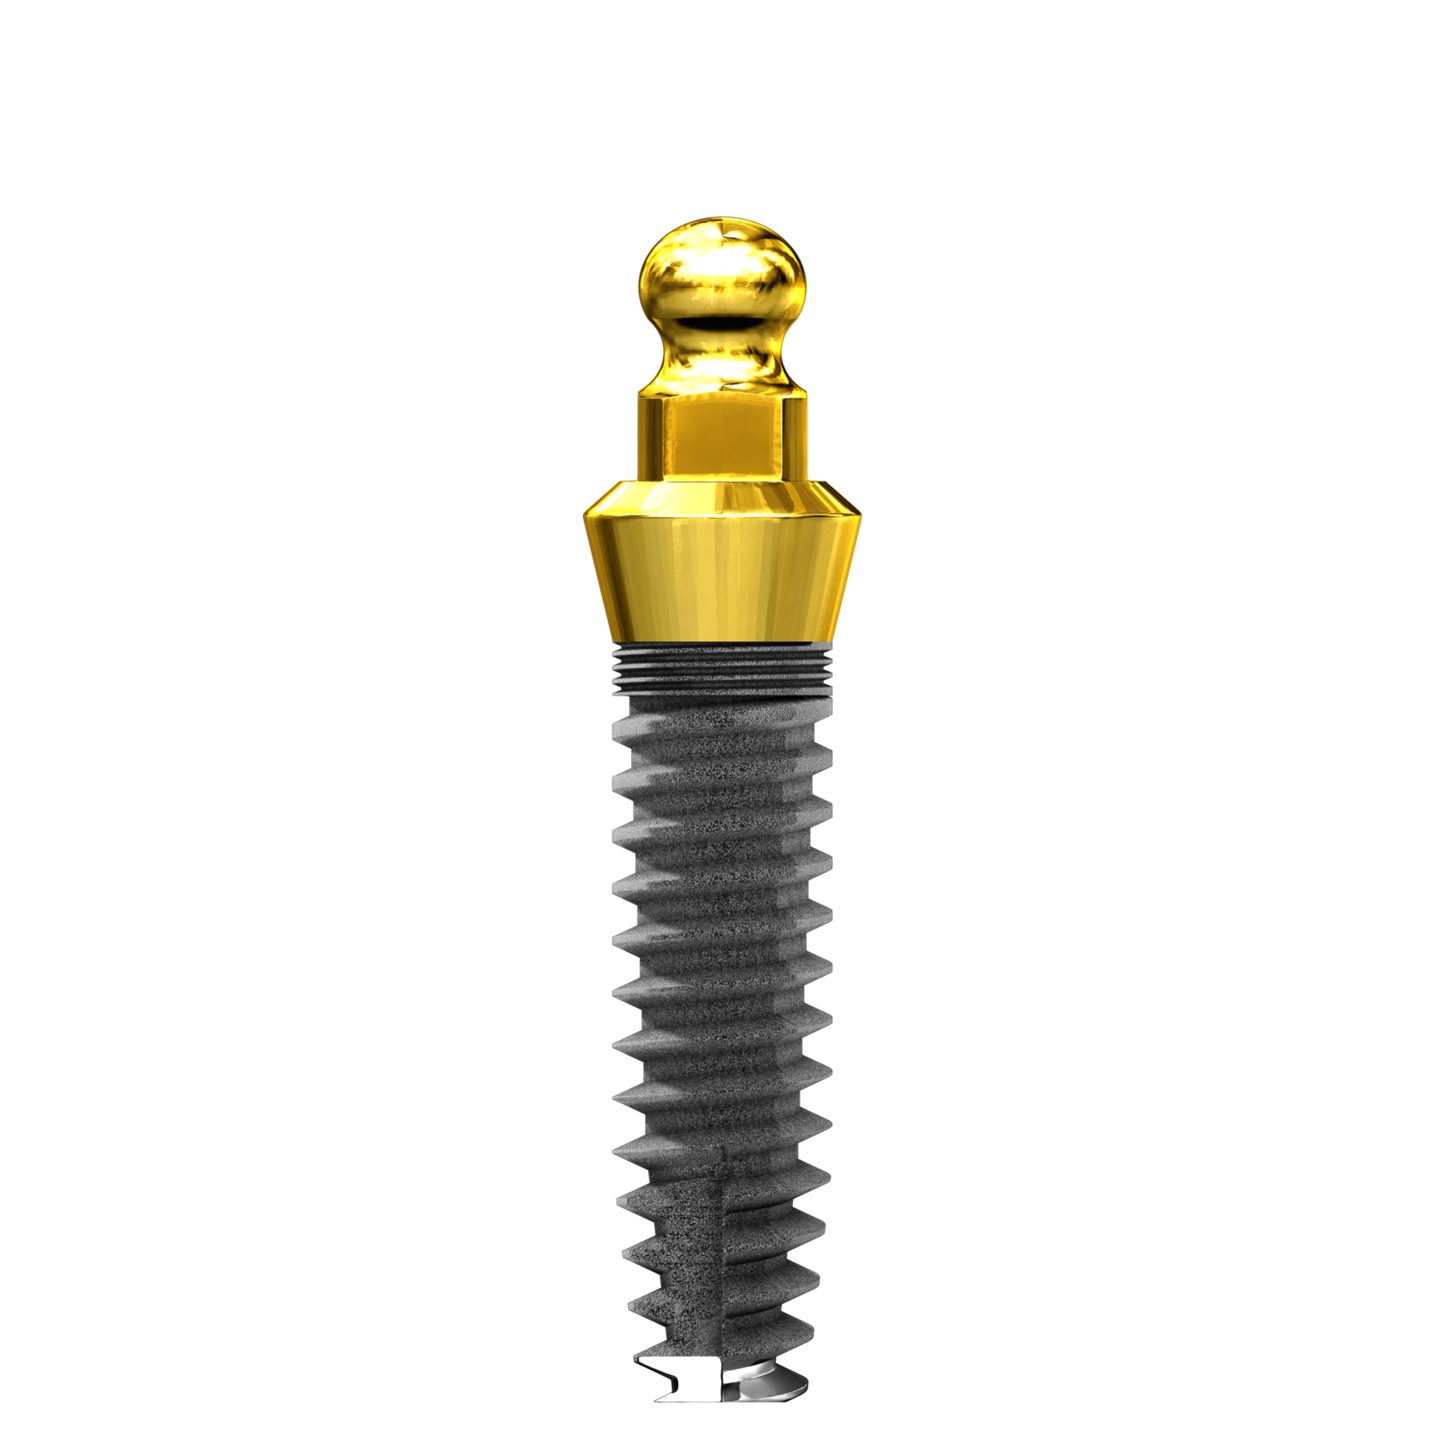 5.0mm x 16mm ISI C&B One Piece Implant